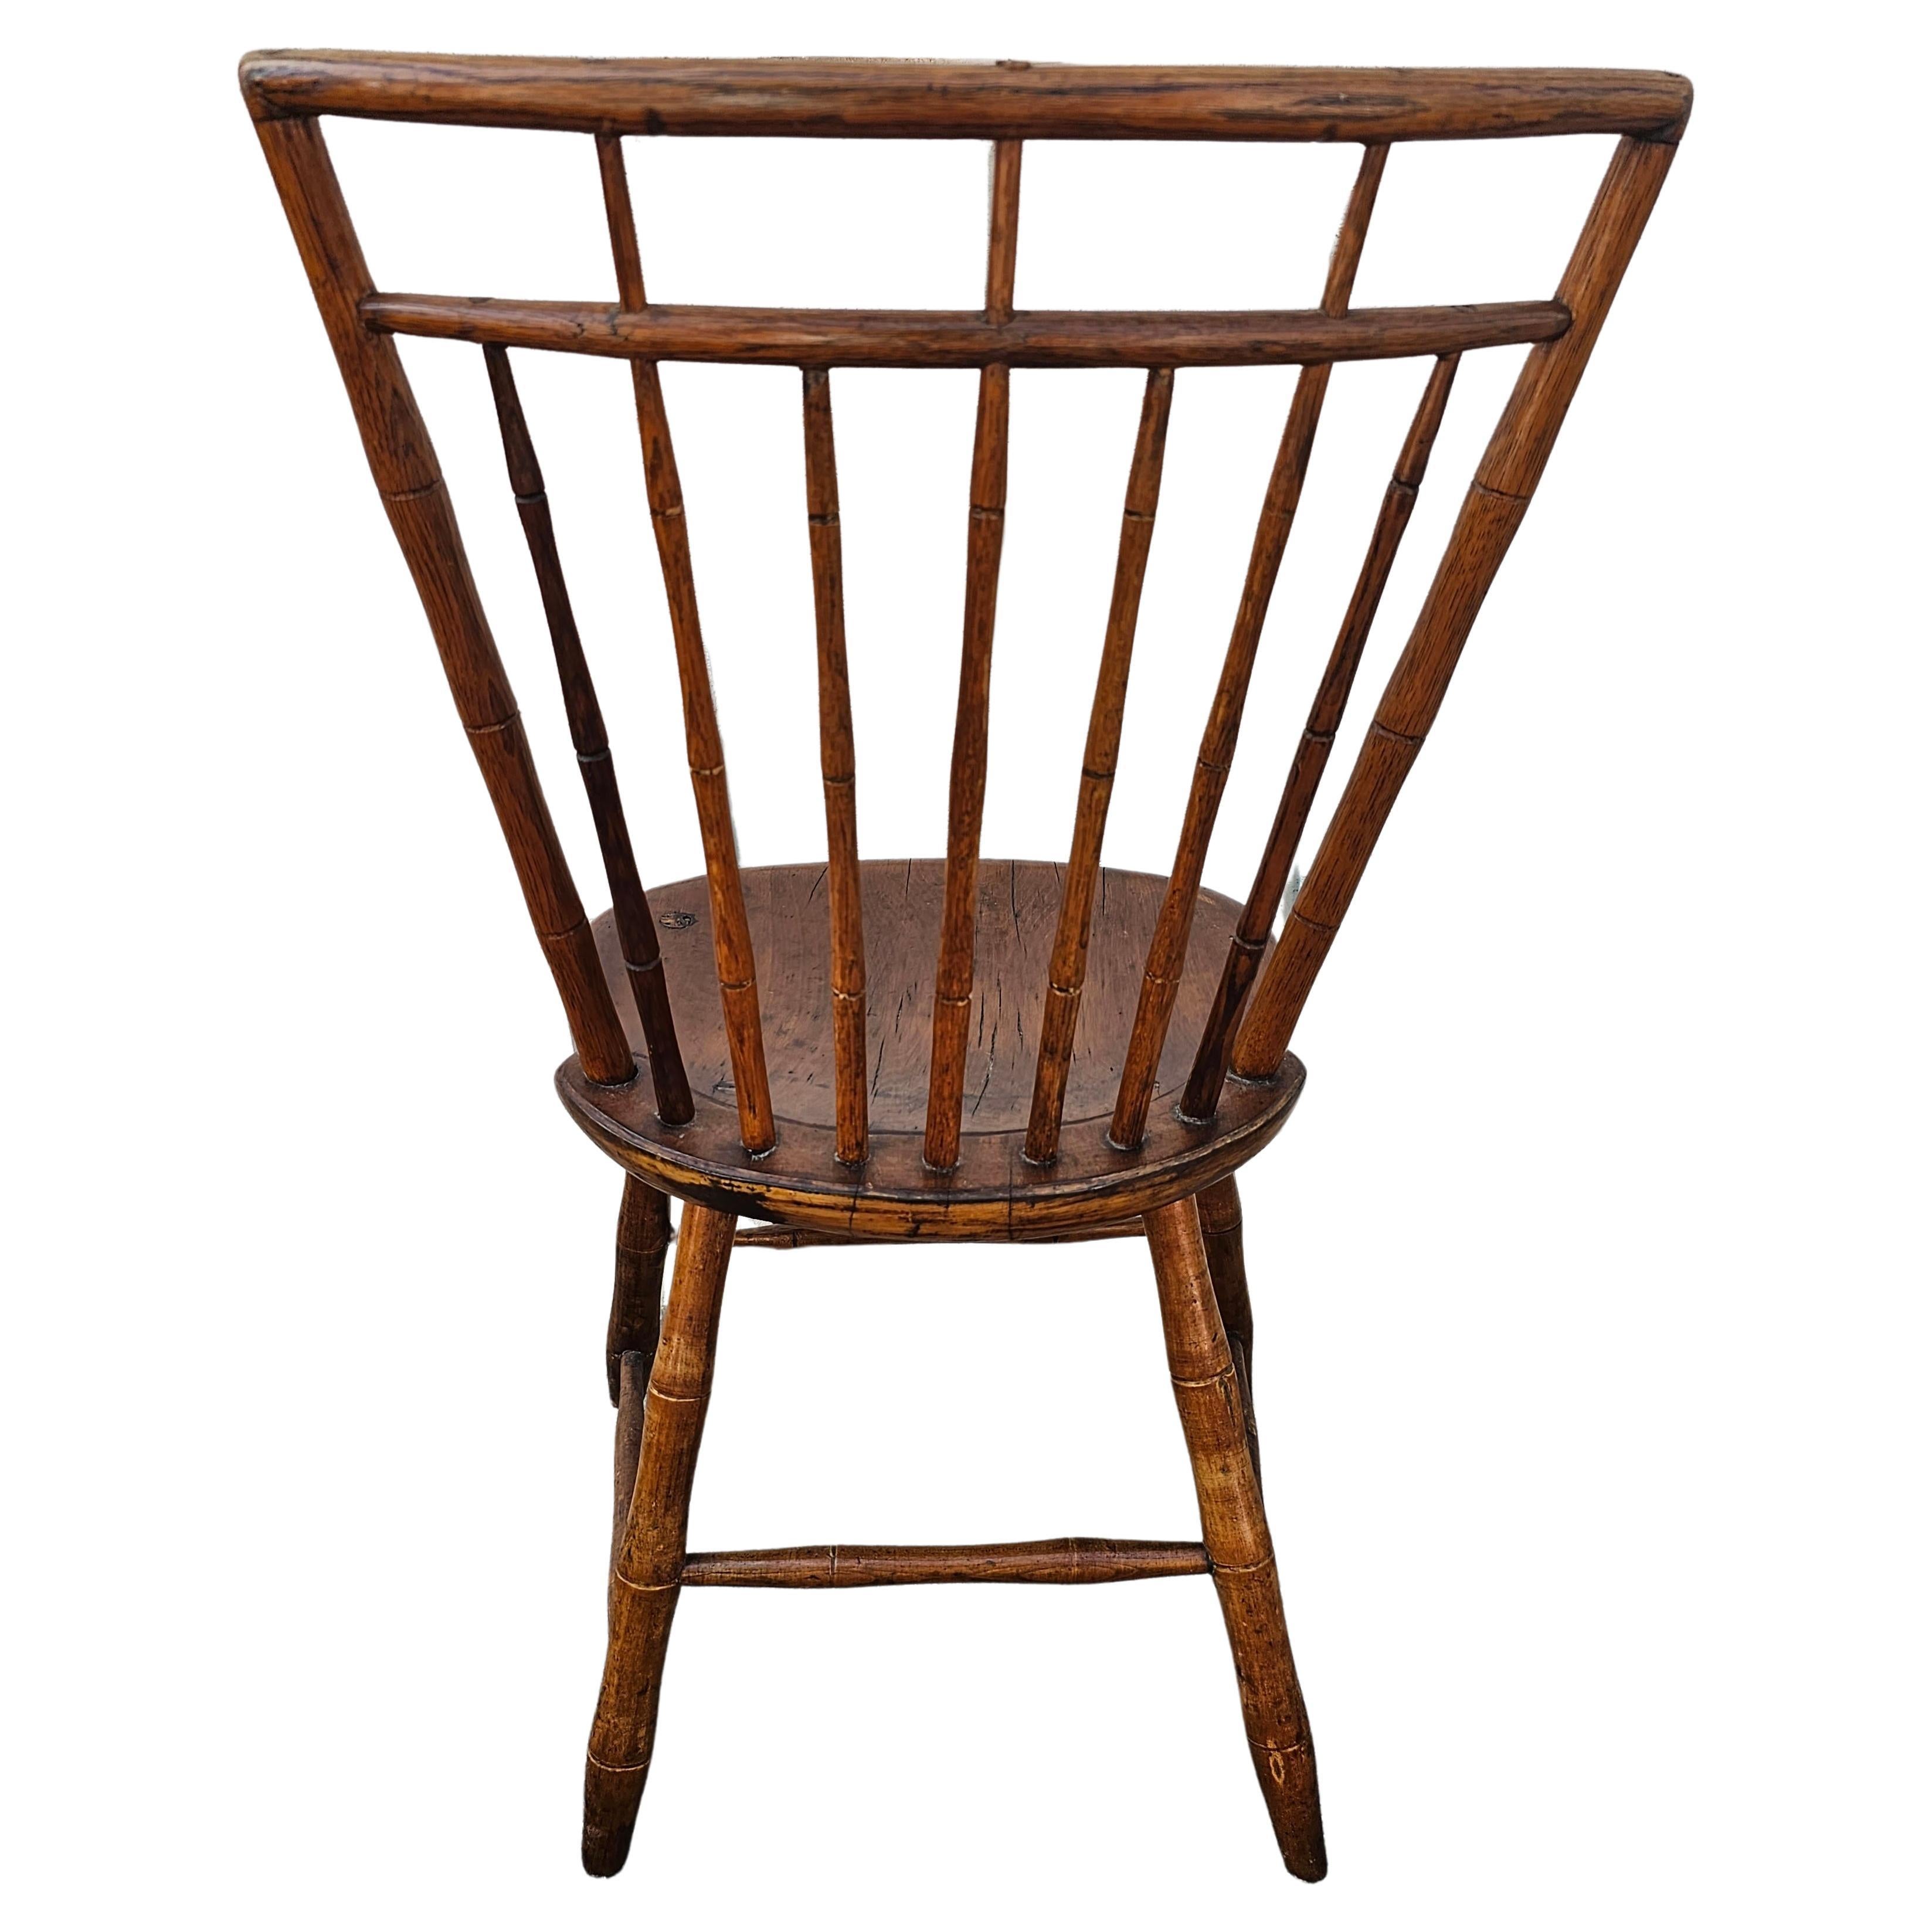 19th Century Early American Elm Windsor Plank Chair In Good Condition For Sale In Germantown, MD